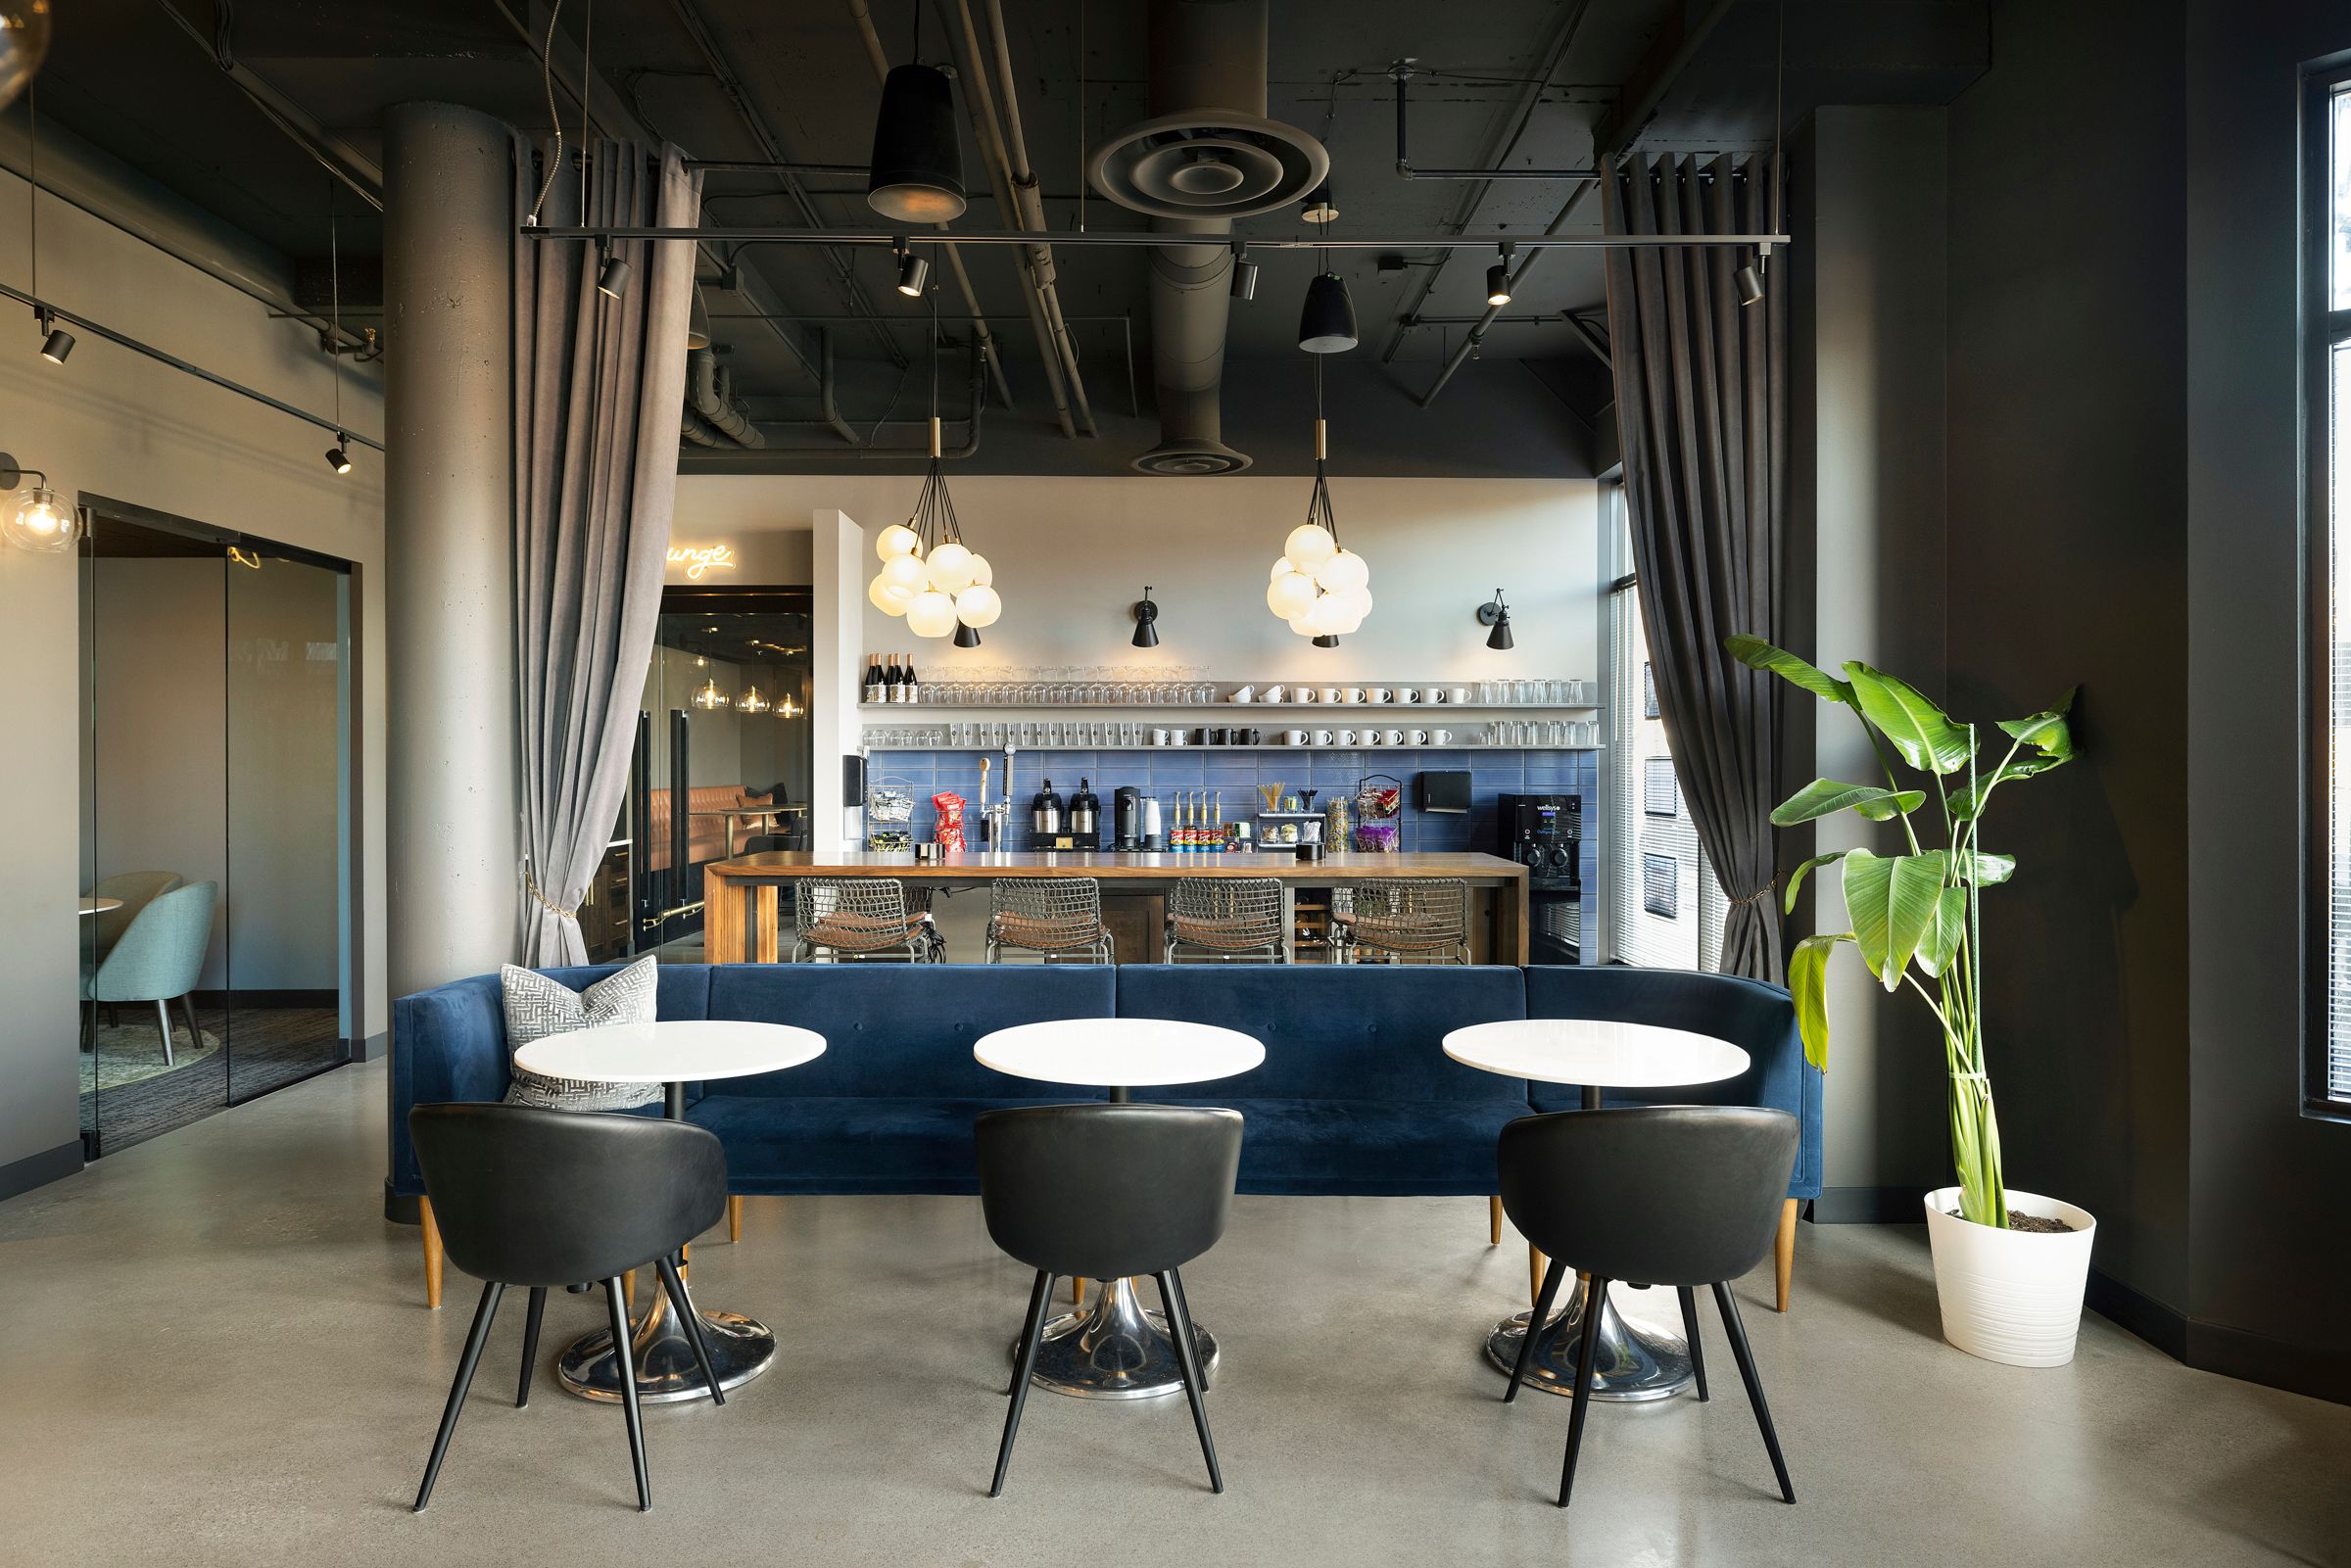 VIBE offices. Three white tables with black chairs and a blue couch in foreground. Bar with drinks, snacks, mugs and glasses in background.